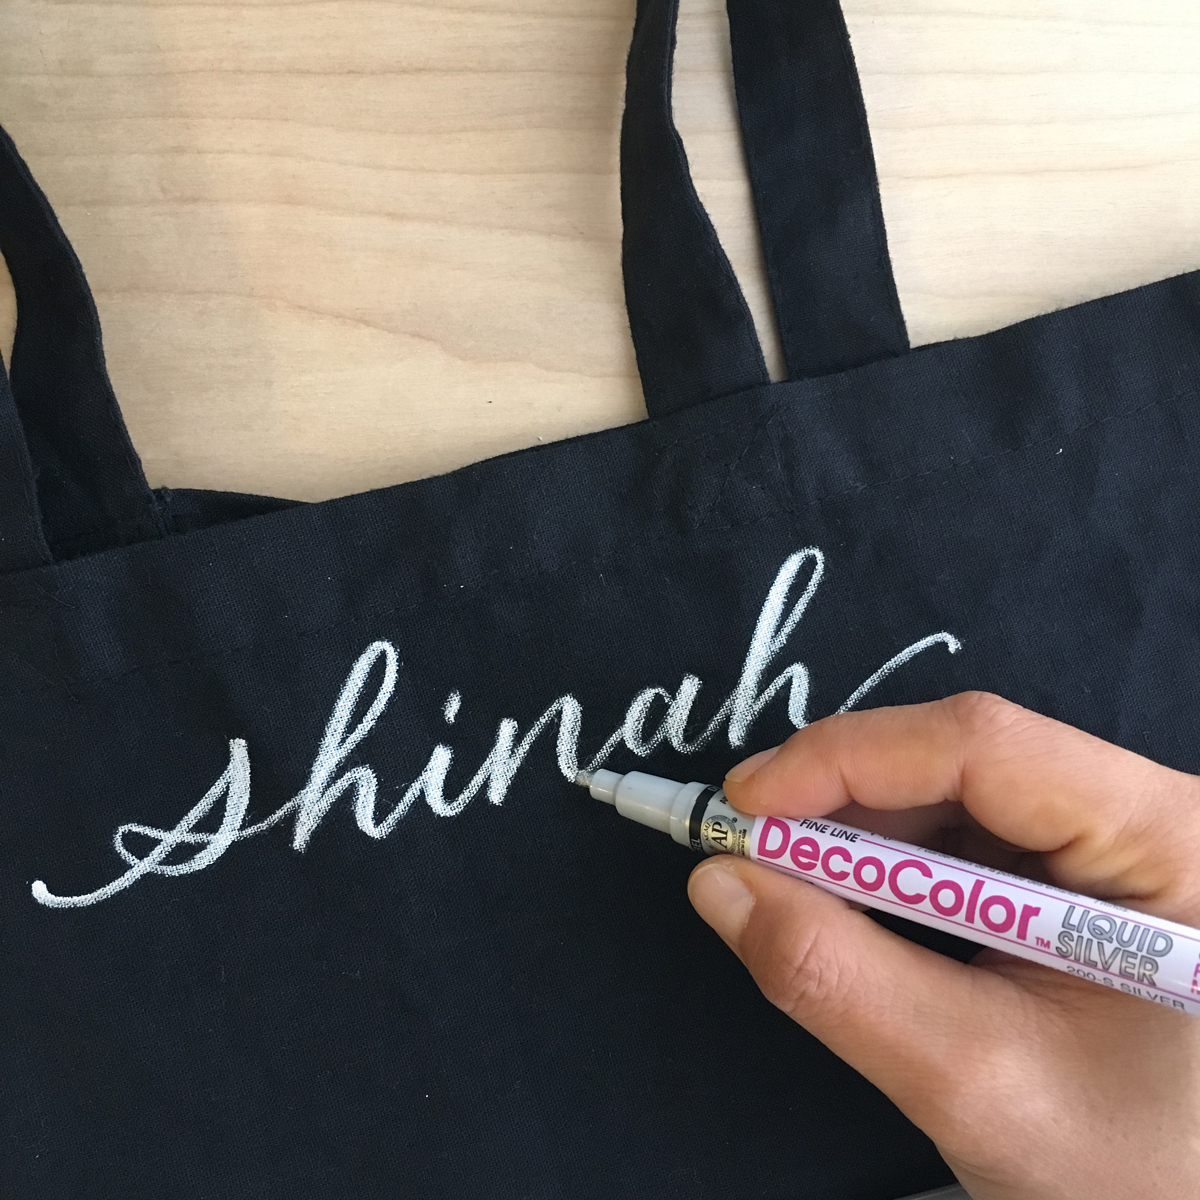 SHINAH REVIEWS: The Best Paint Markers for lettering on canvas